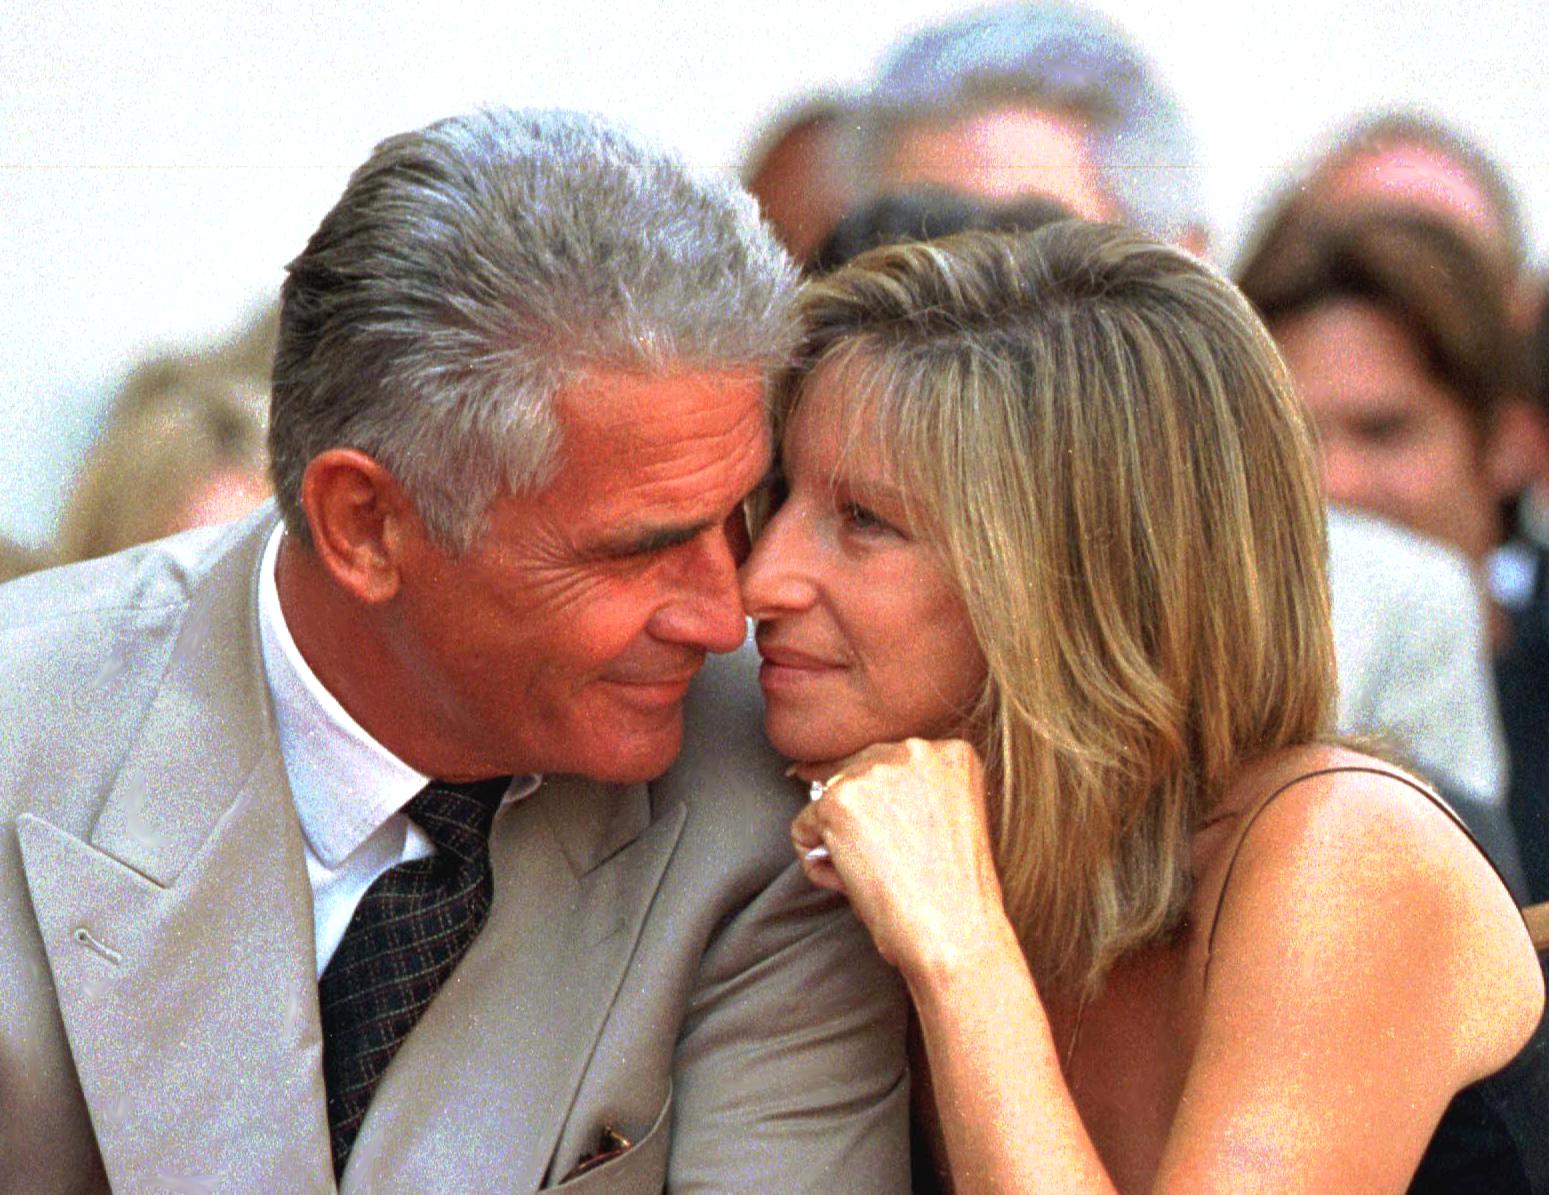 James Brolin and Barbara Streisand in Hollywood in 1998 | Source: Getty Images